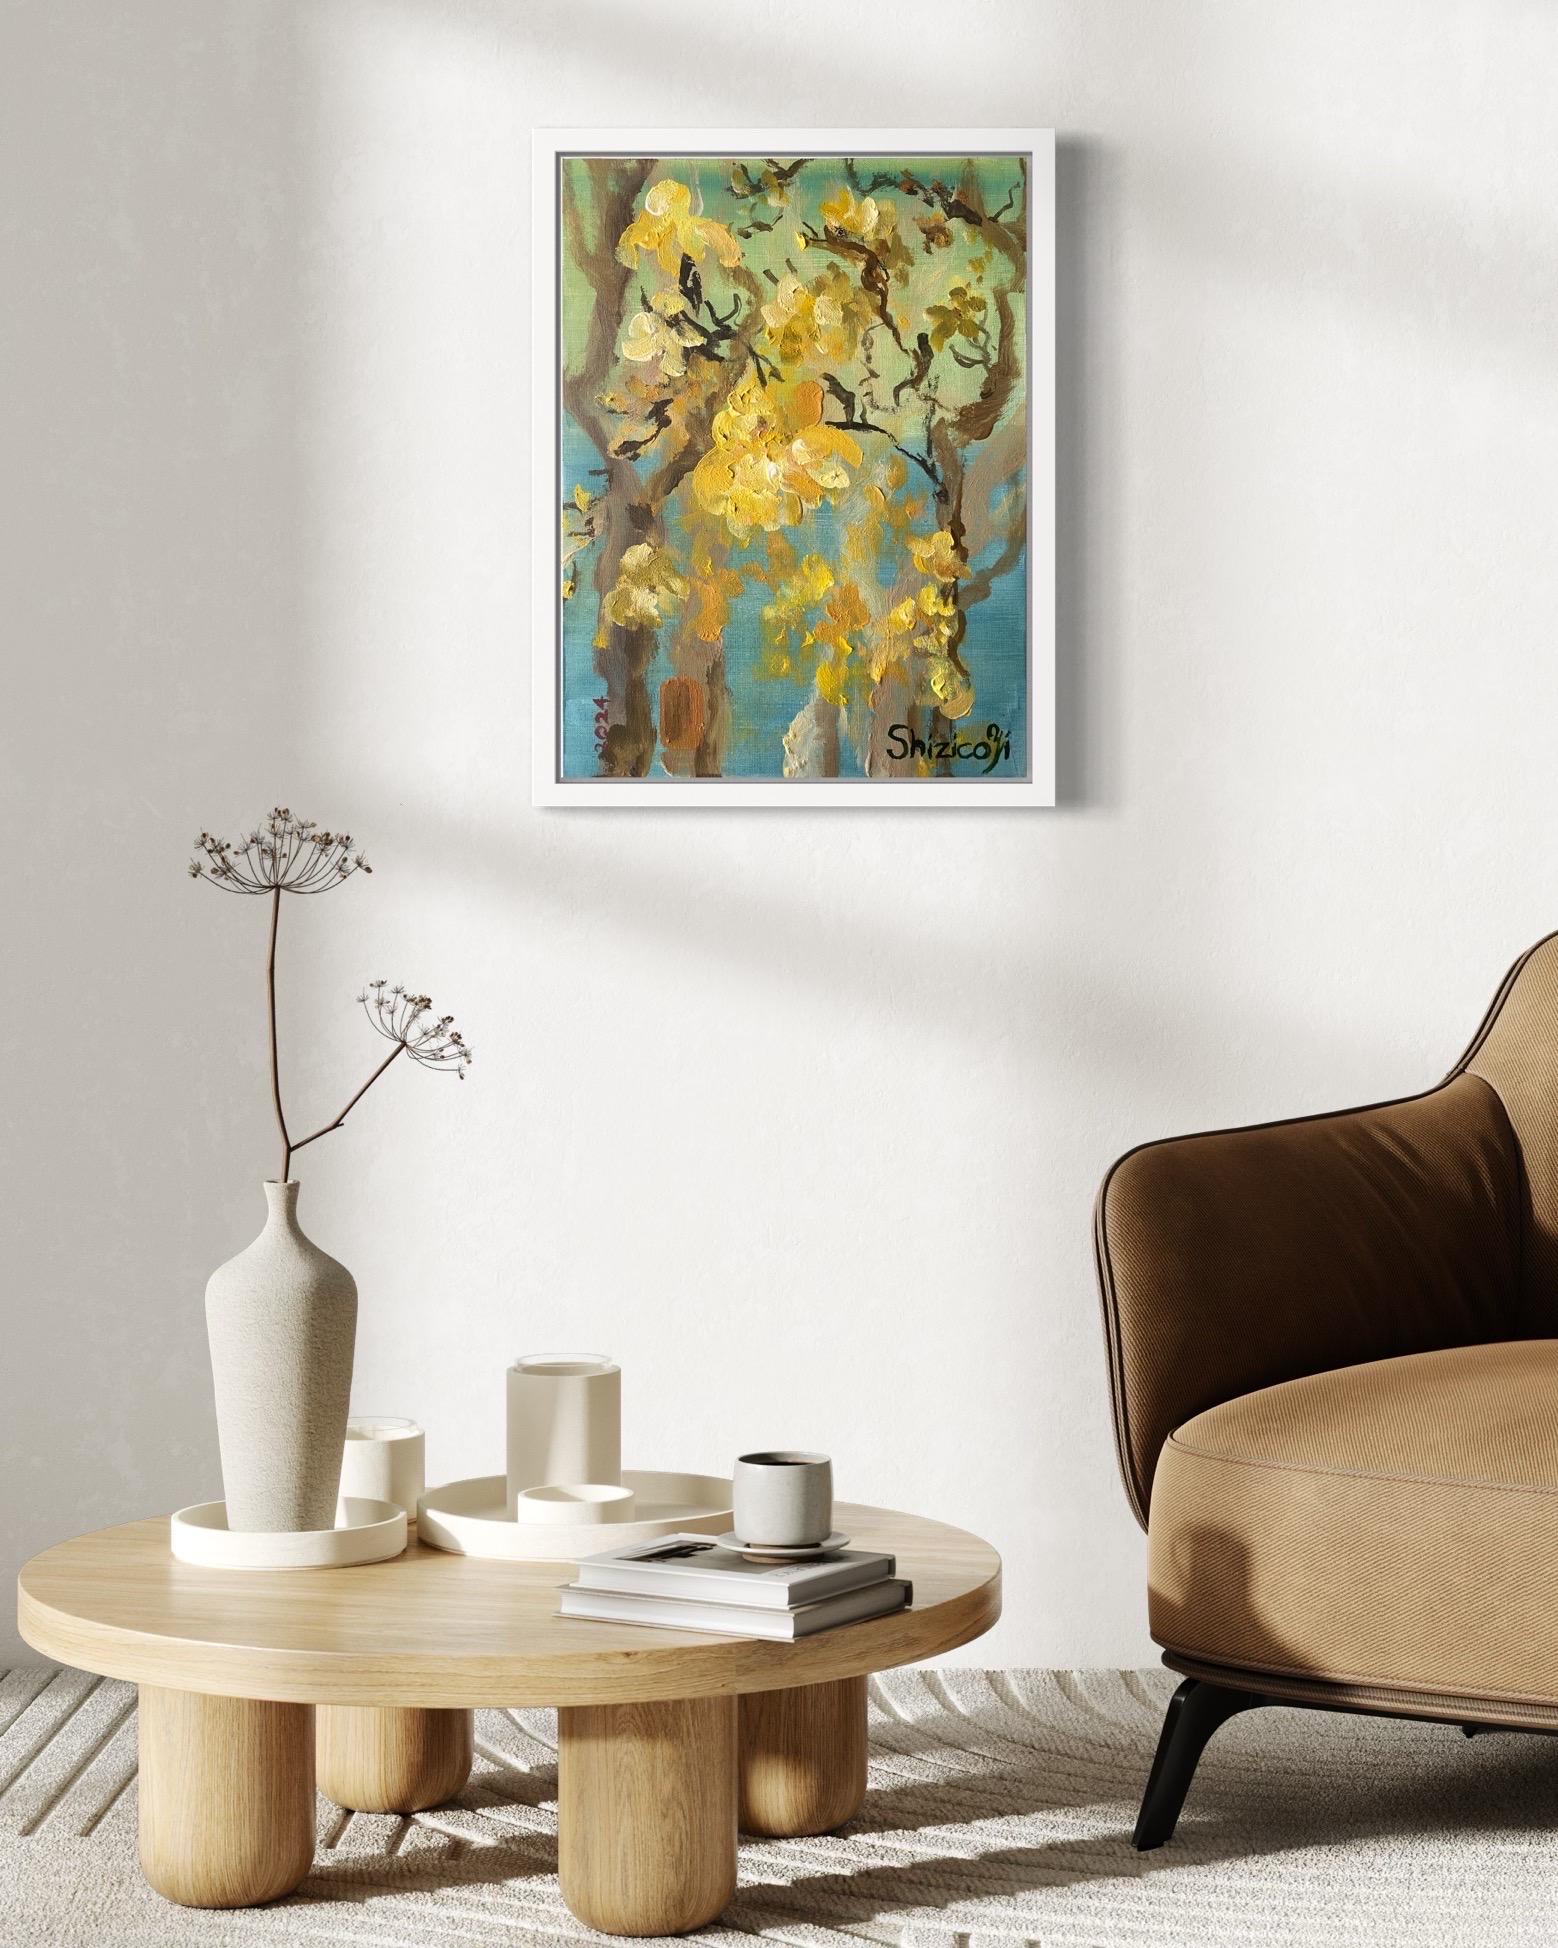 Original-Magnolias-Memory Landscape-UK Awarded Artist-oil on canvas board-Spring - Painting by Shizico Yi